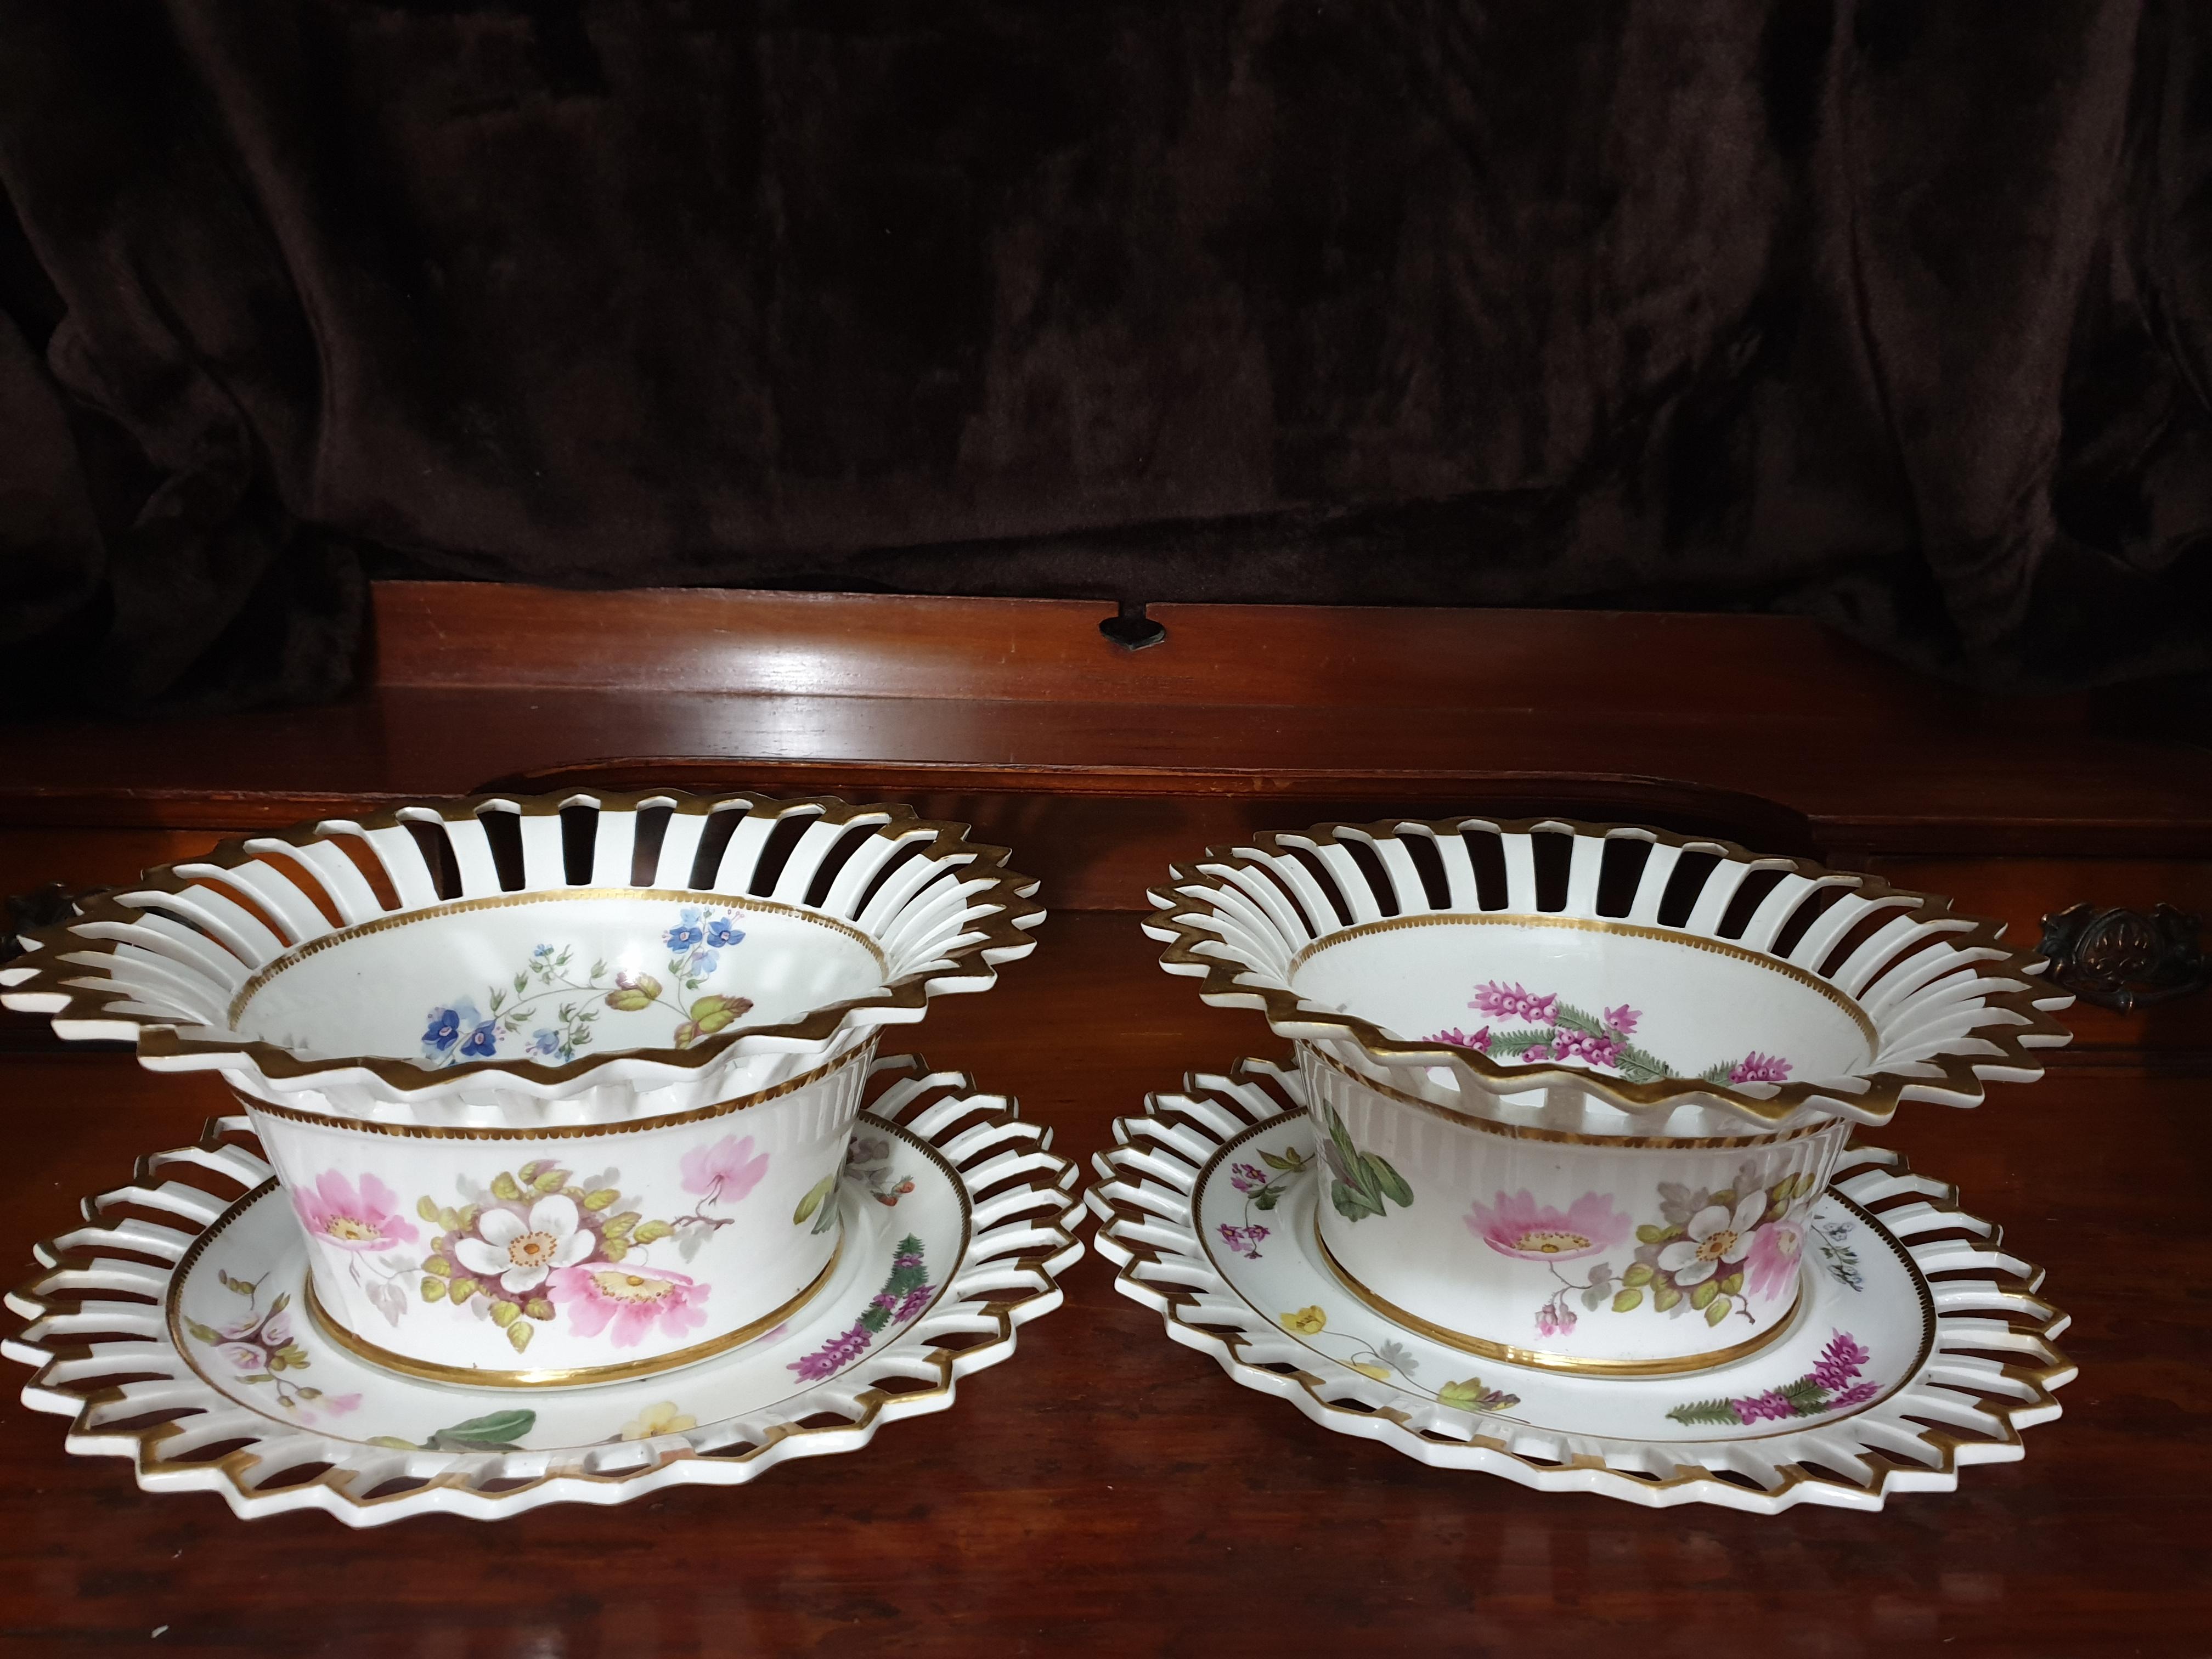 H & R Daniel Ice Pail Reticulated Fruit Bowls or Stands By William Pollard In Excellent Condition For Sale In London, GB